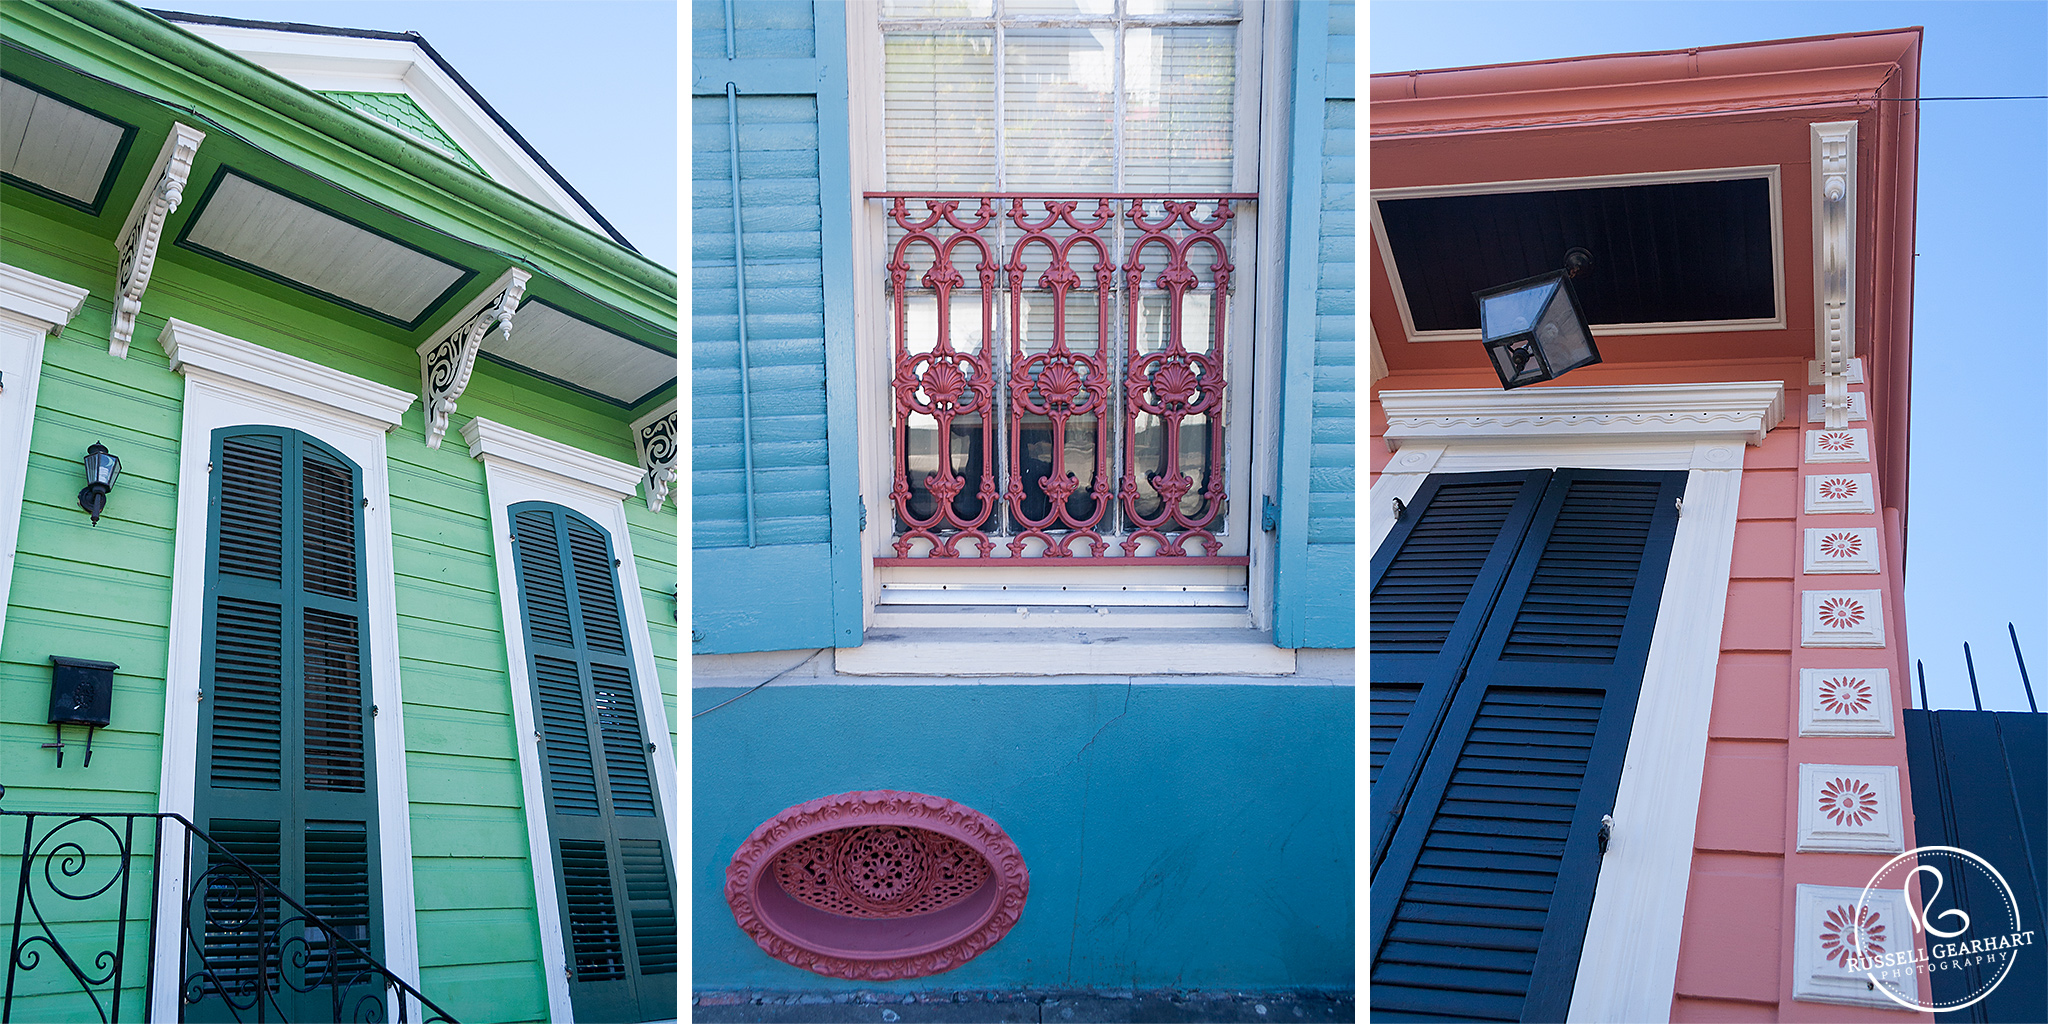 The houses in New Orleans are painted in bright jewel colors of coral, canary, mint, robin's egg blue, and more.